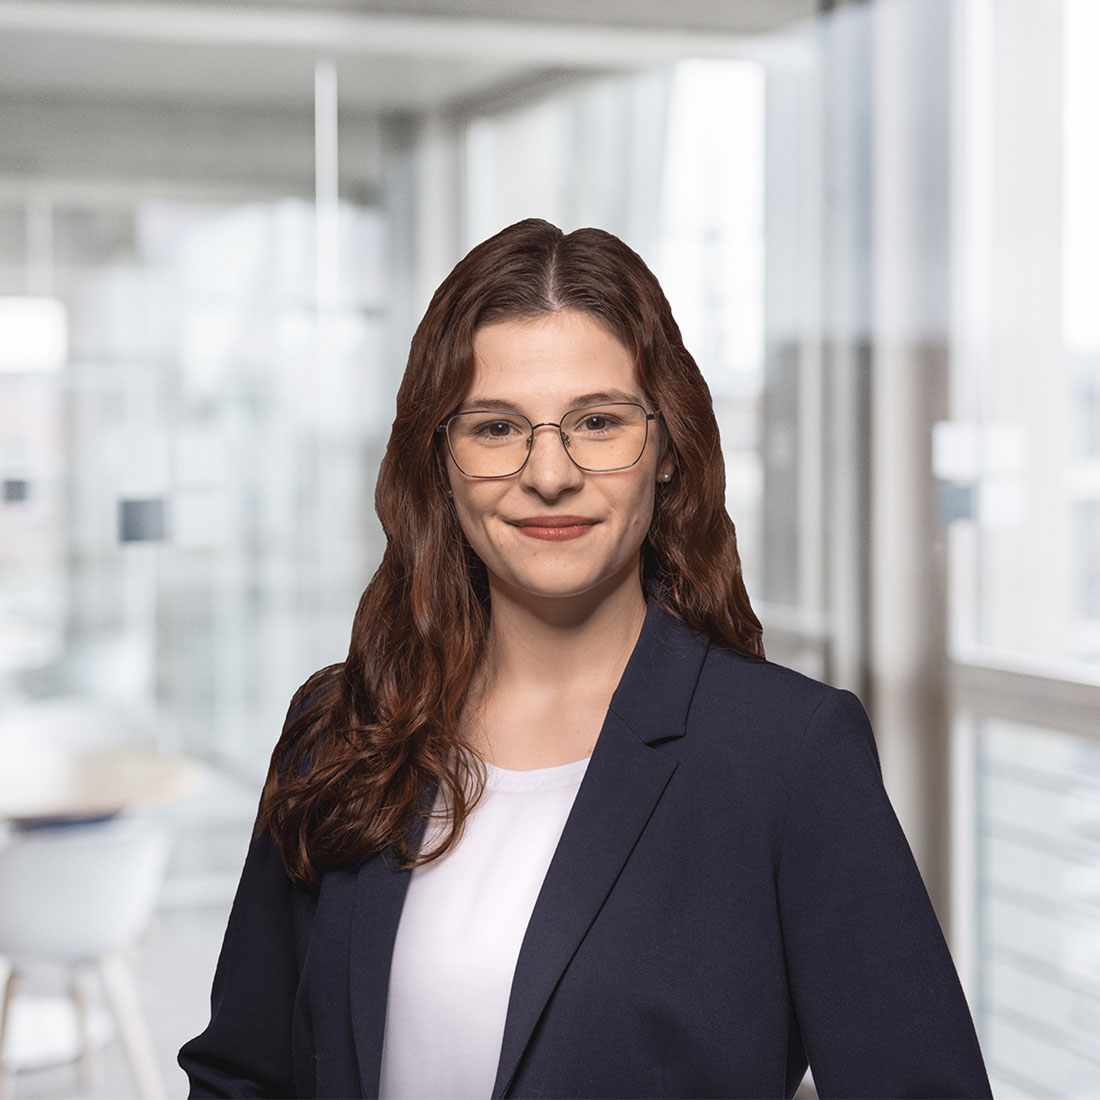 Sales Manager Anna-Lena Juergens